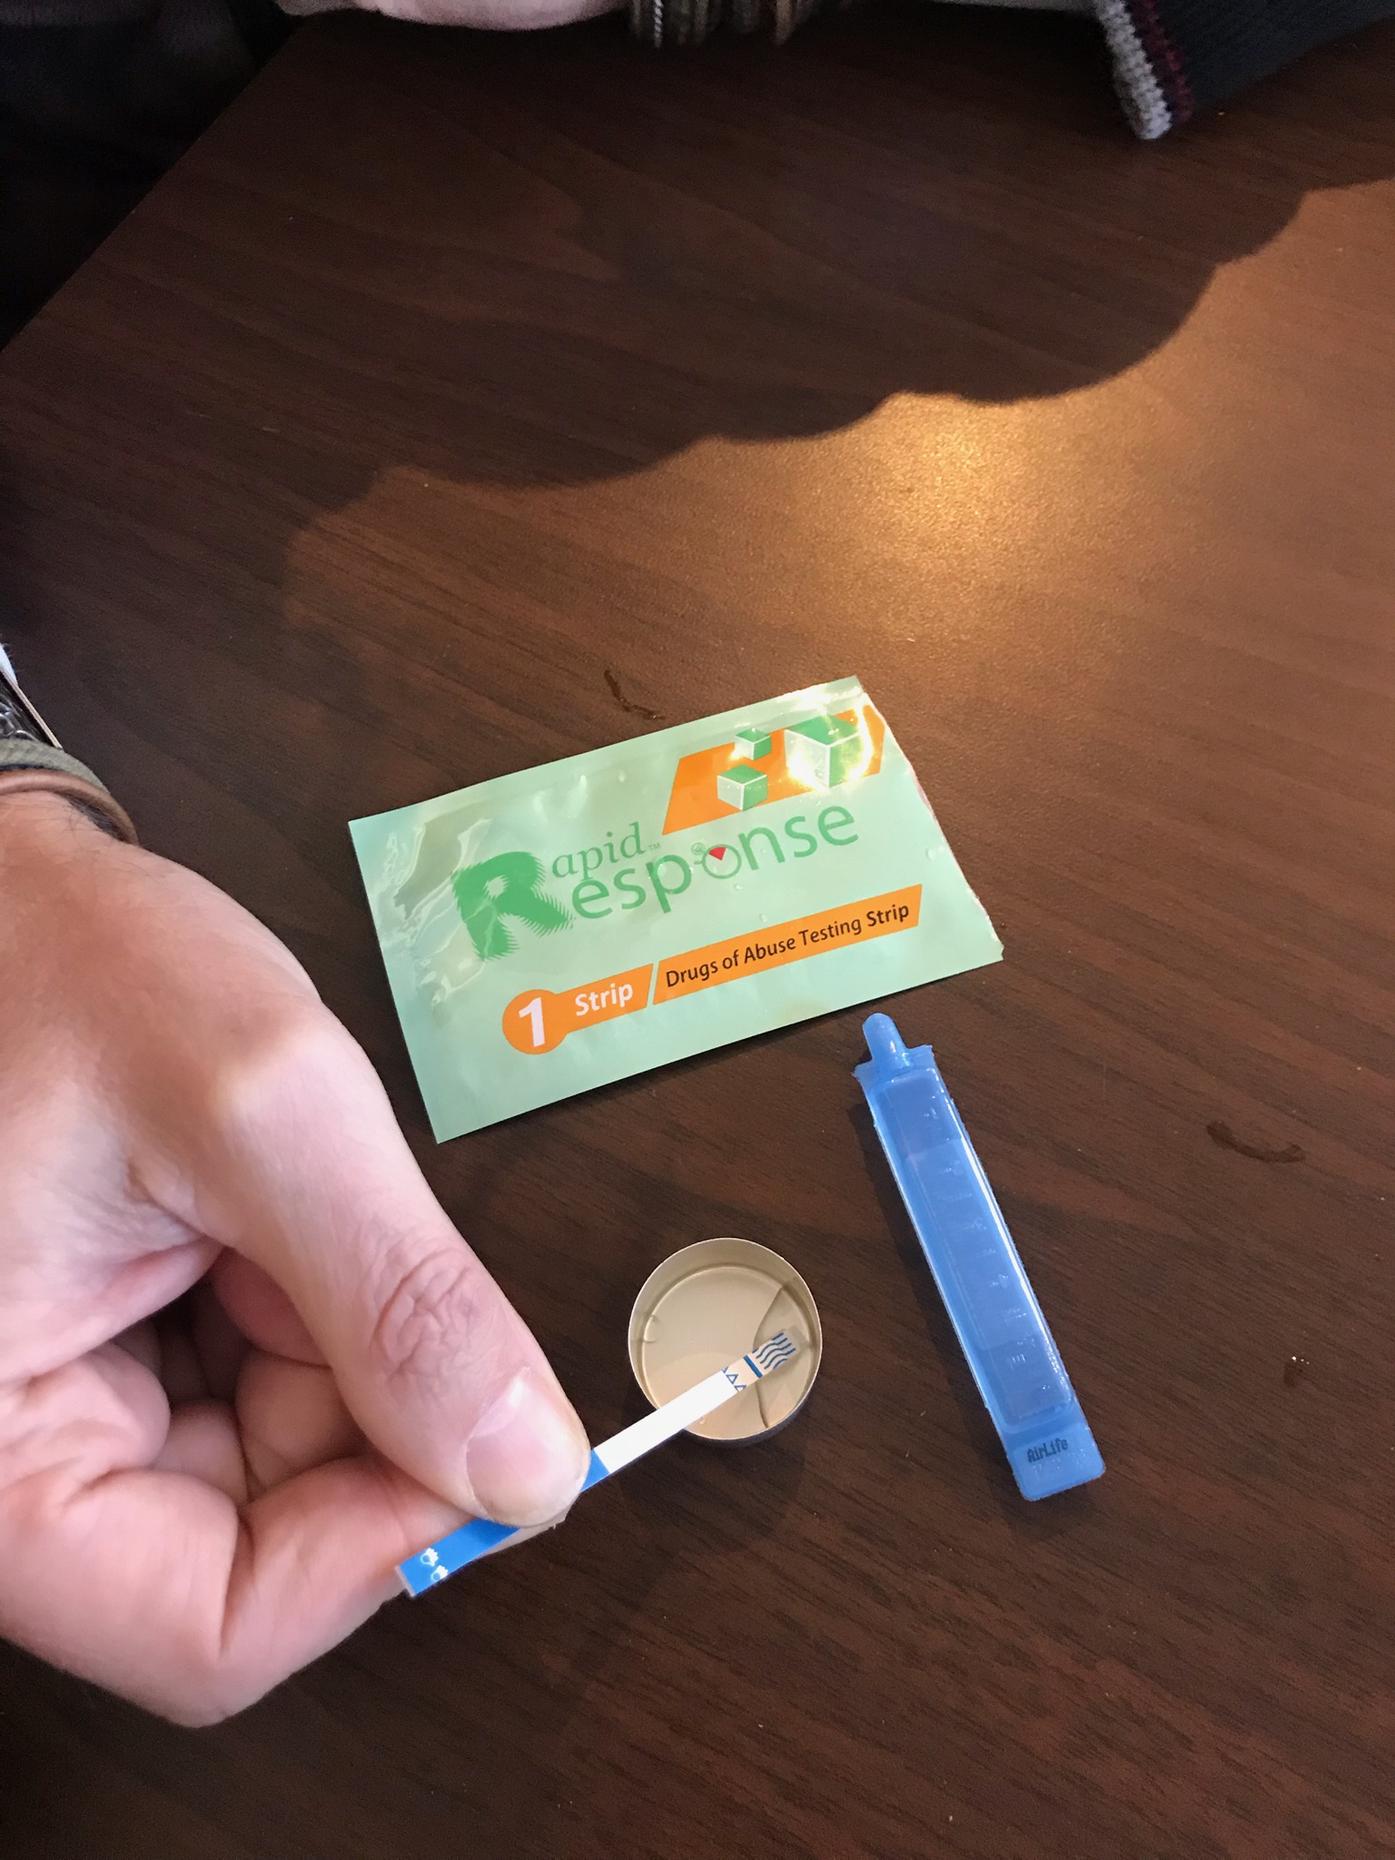 Fentanyl Test Strips Save Lives and the Dangers of Fentanyl